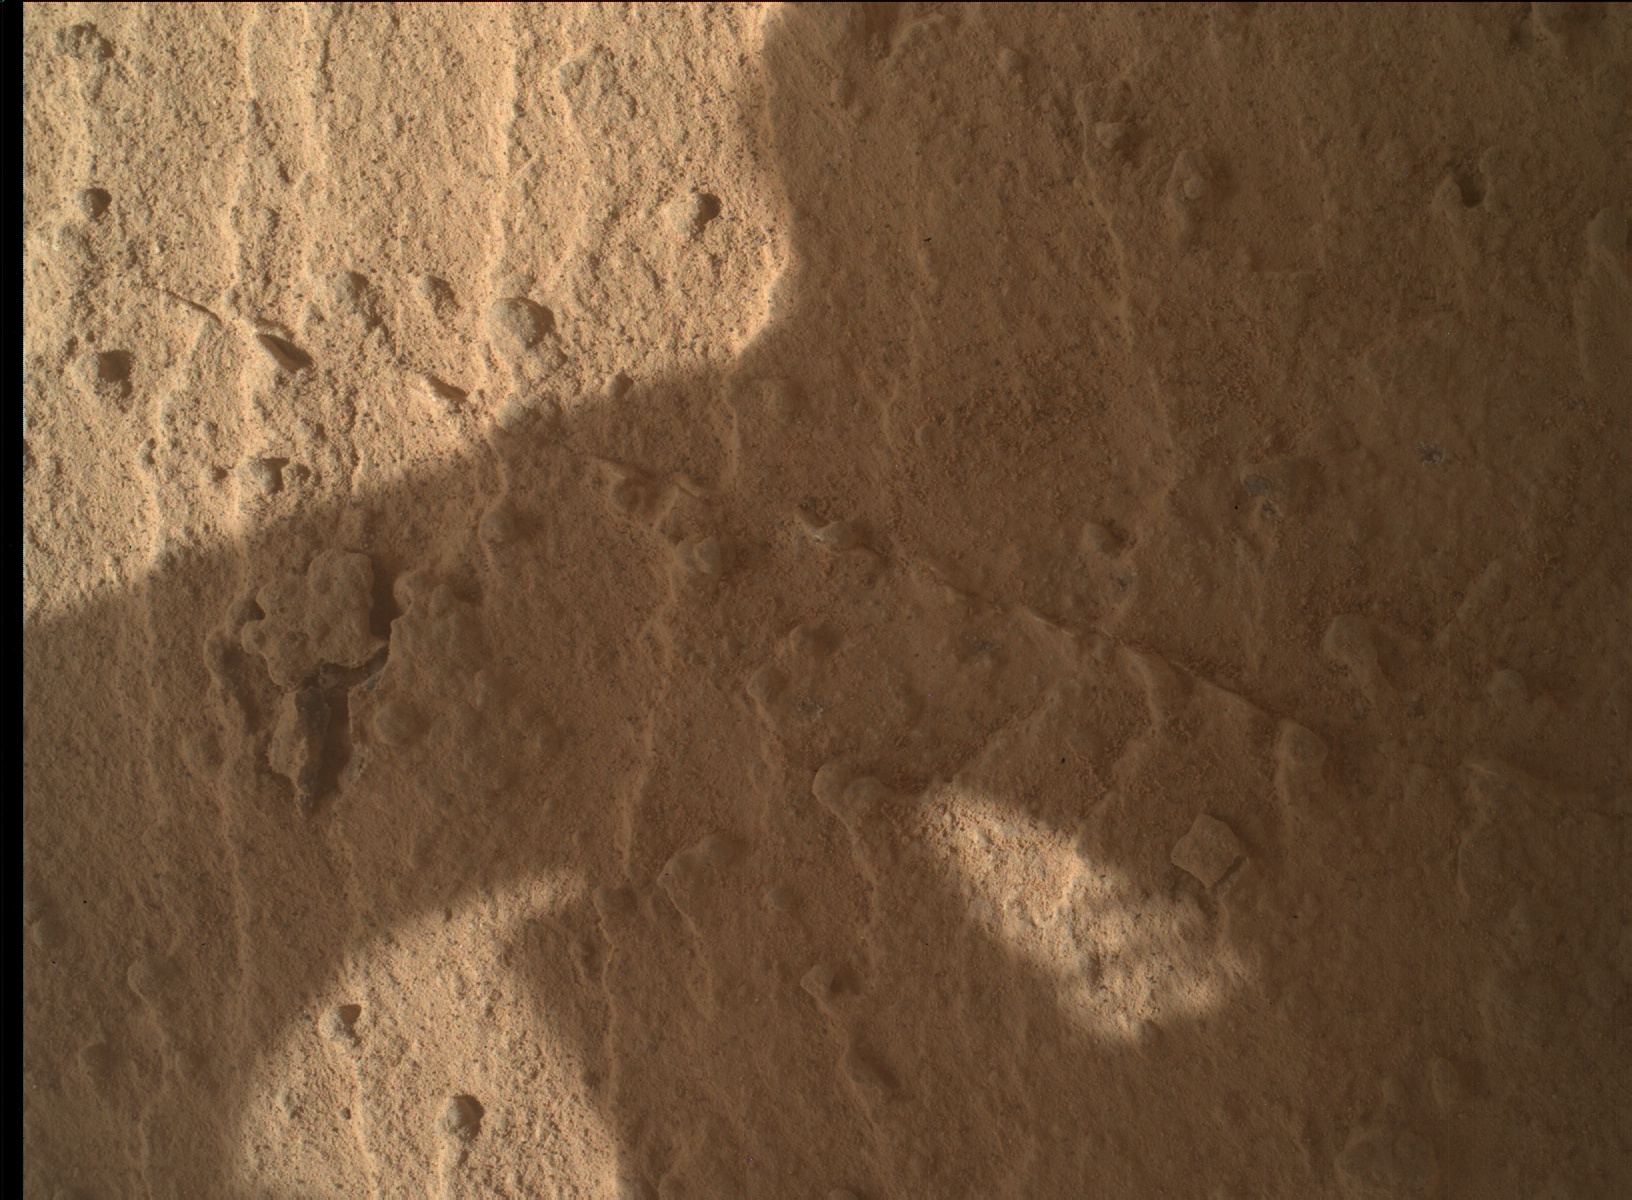 Nasa's Mars rover Curiosity acquired this image using its Mars Hand Lens Imager (MAHLI) on Sol 3916